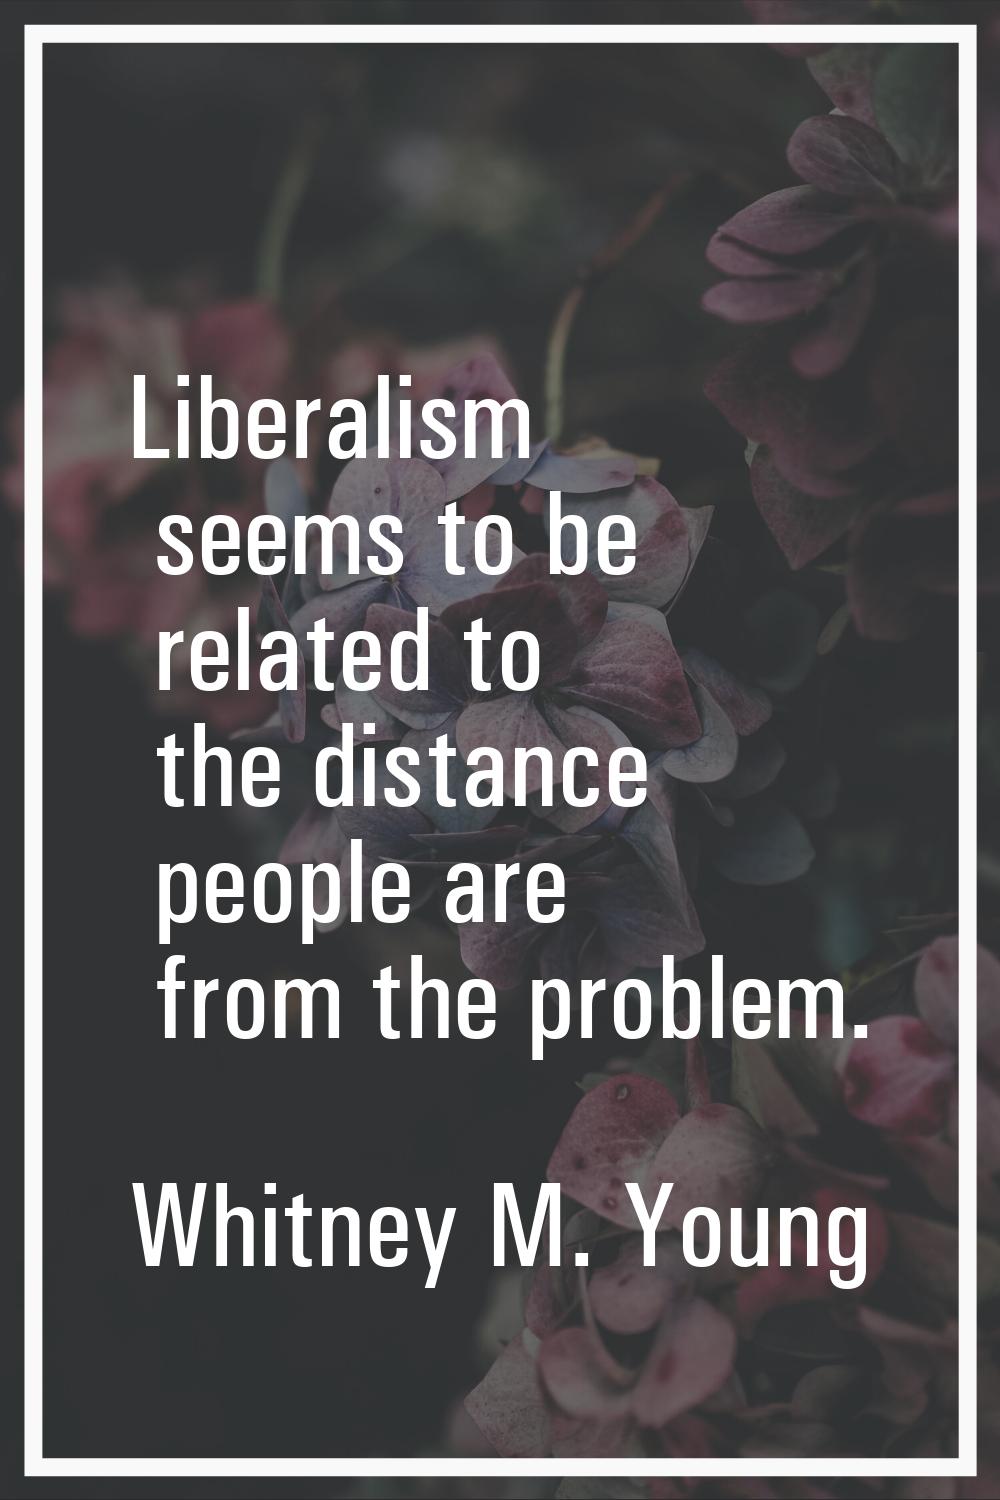 Liberalism seems to be related to the distance people are from the problem.